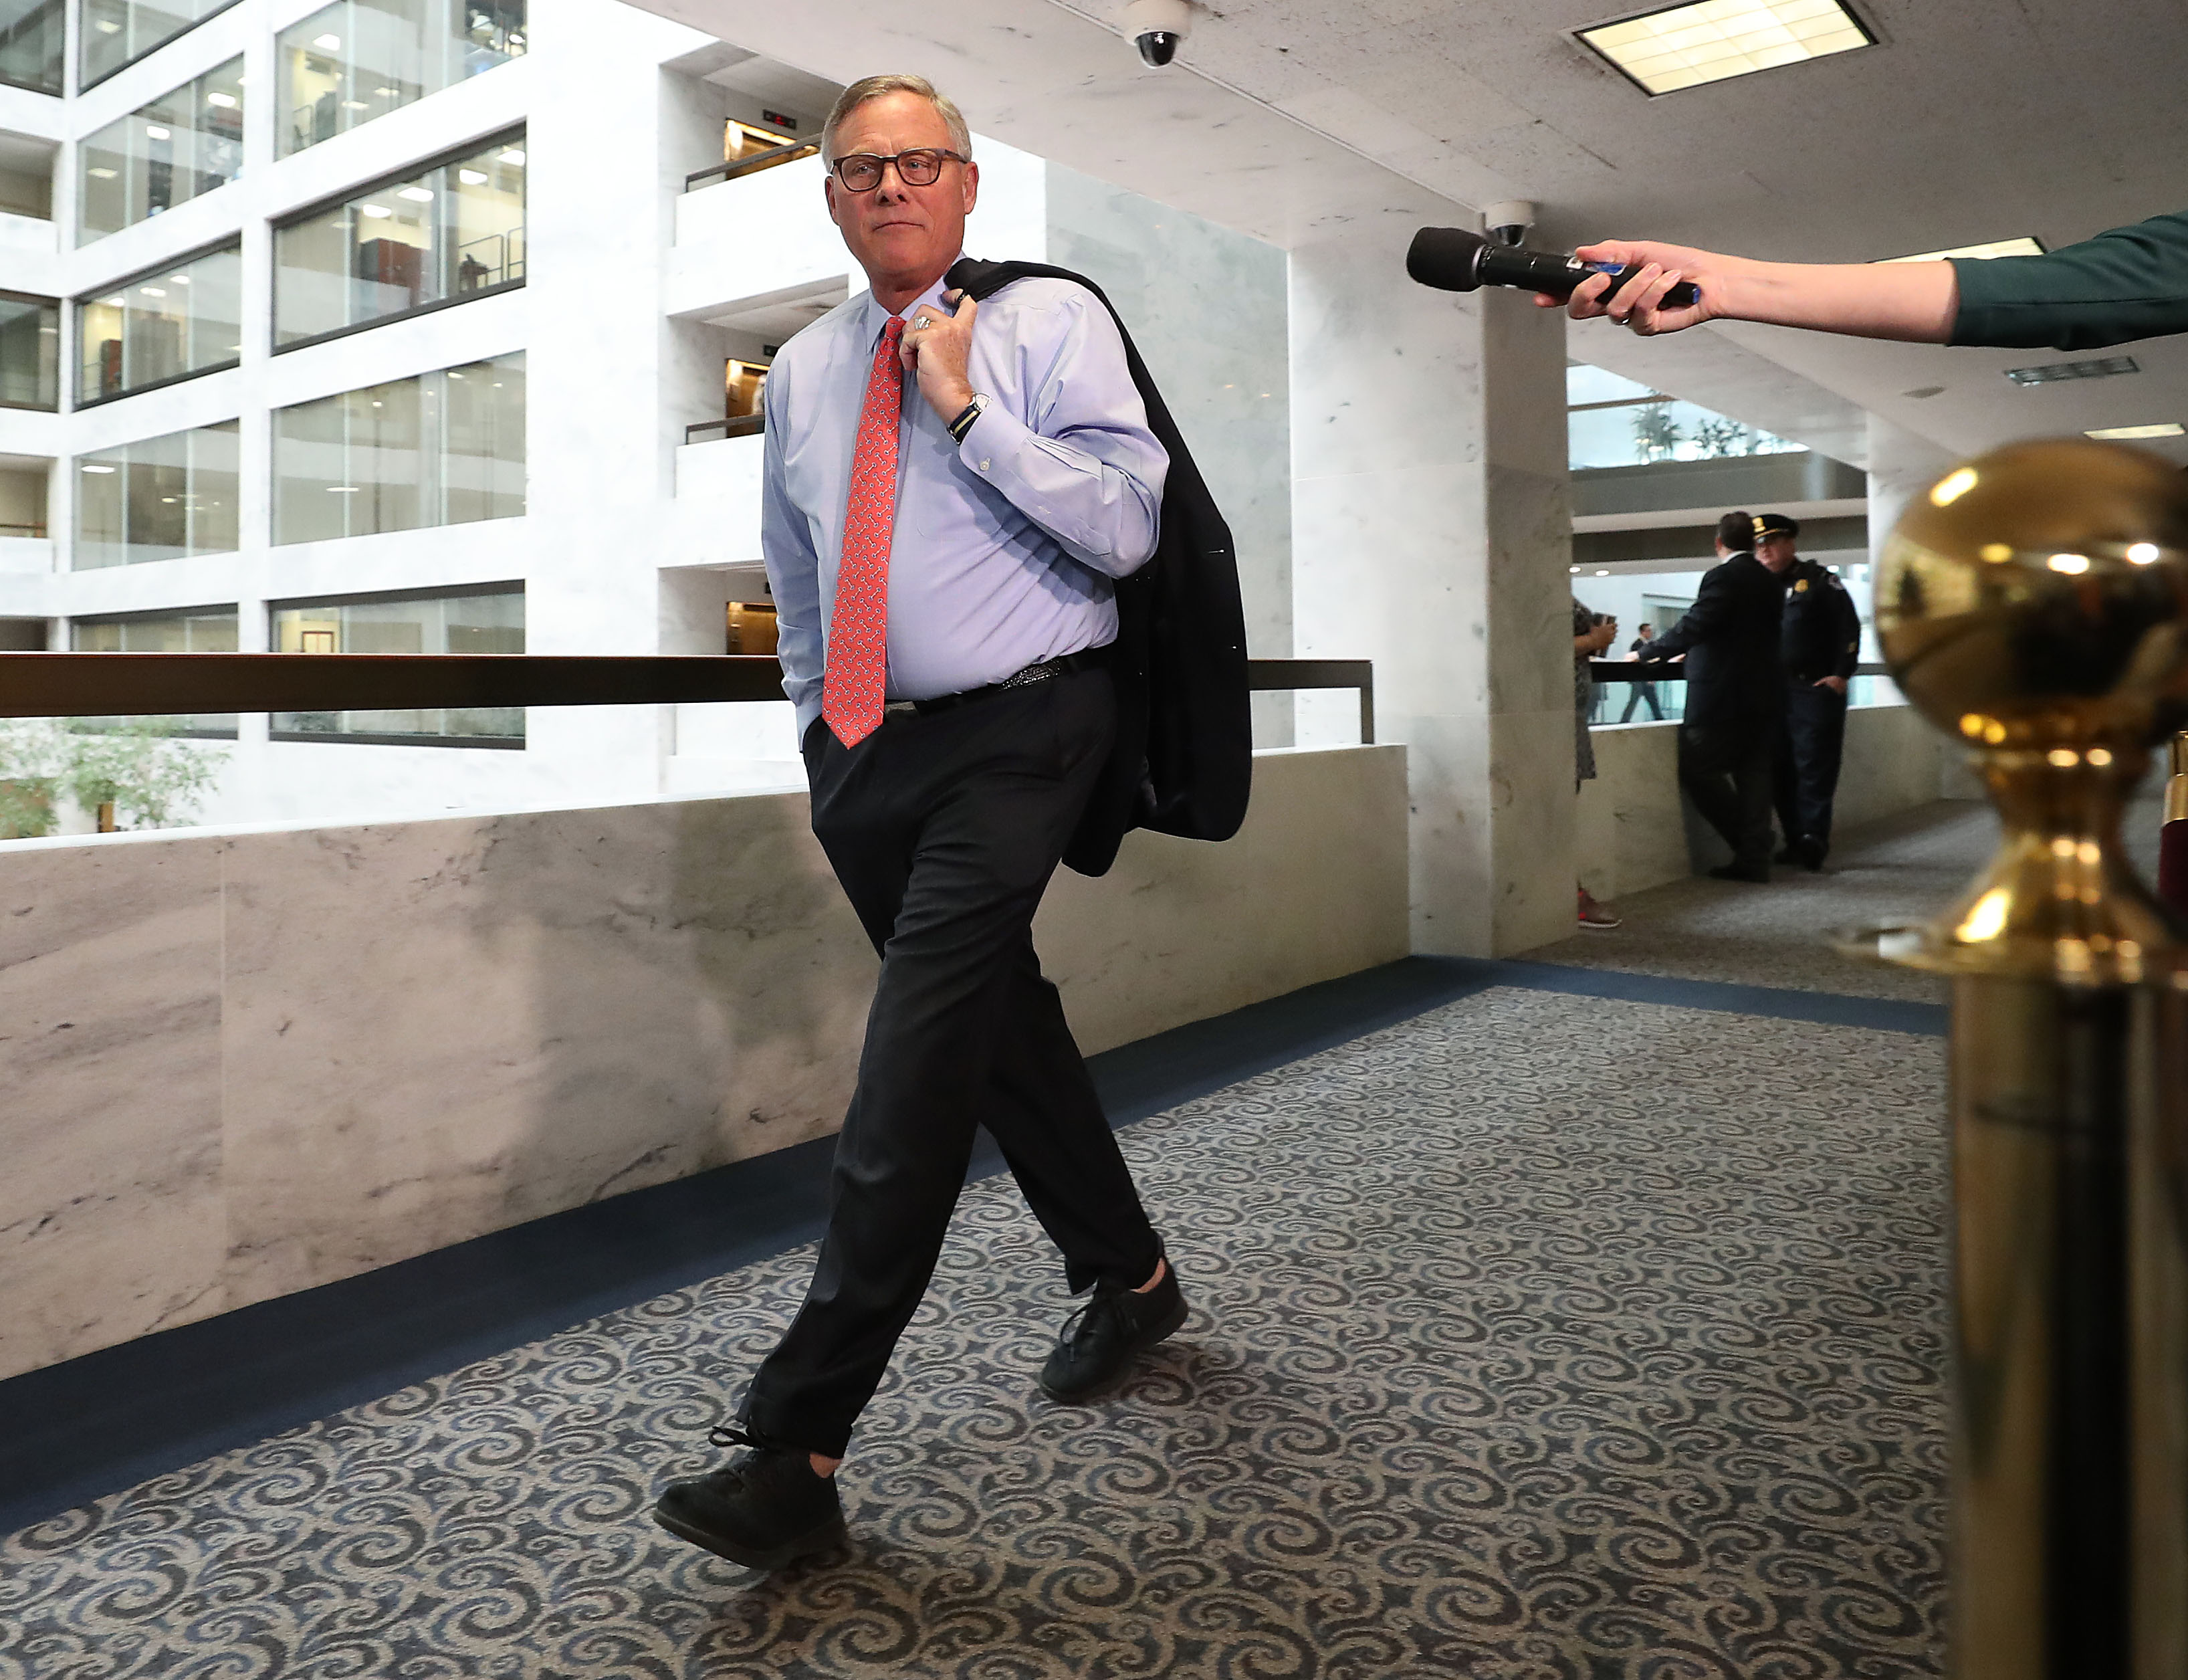 Chairman of the Senate Intelligence Committee Richard Burr walks to a closed-door hearing where Michael Cohen, former attorney and fixer for President Donald Trump, will be testifying at the Hart Senate Office Building before testifying to the Senate Intelligence Committee on Capitol Hill February 26, 2019 in Washington, DC. (Photo by Mark Wilson/Getty Images)